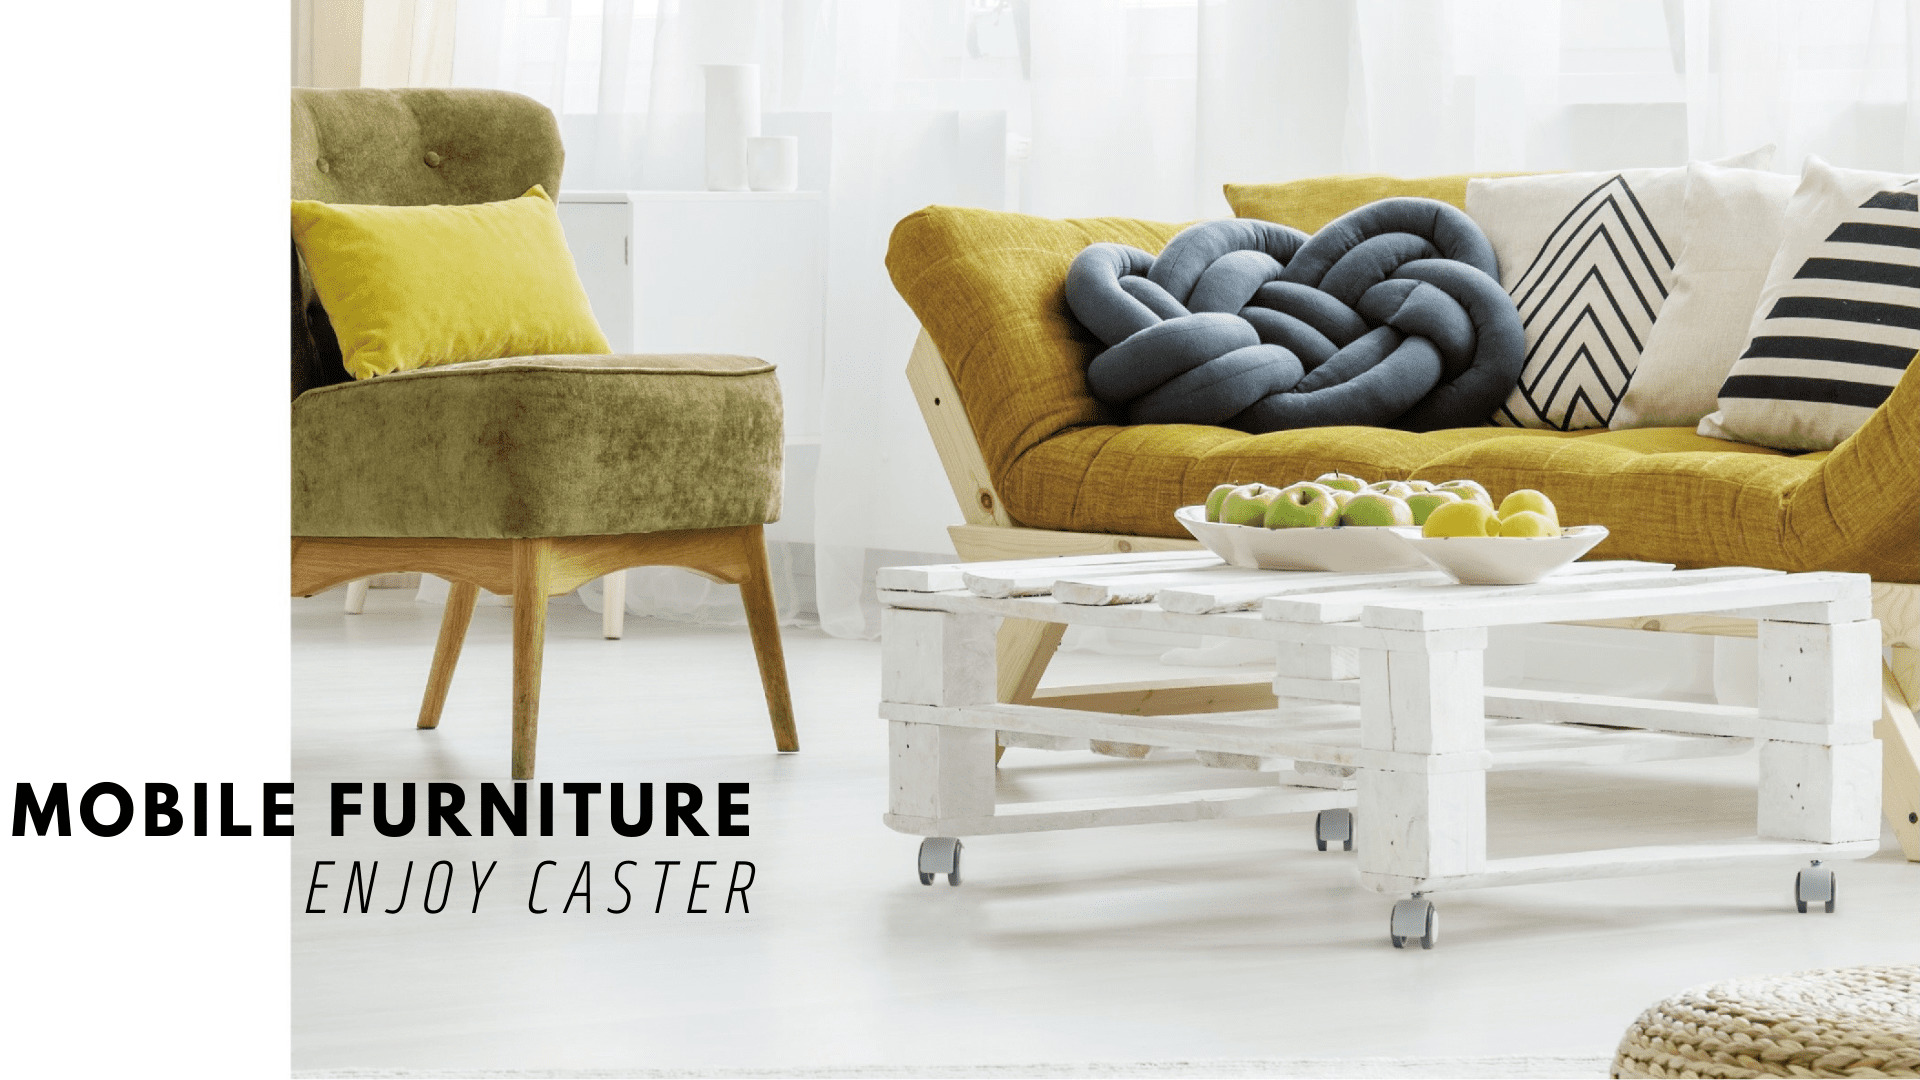 Mobile Furniture: The next big thing to consider